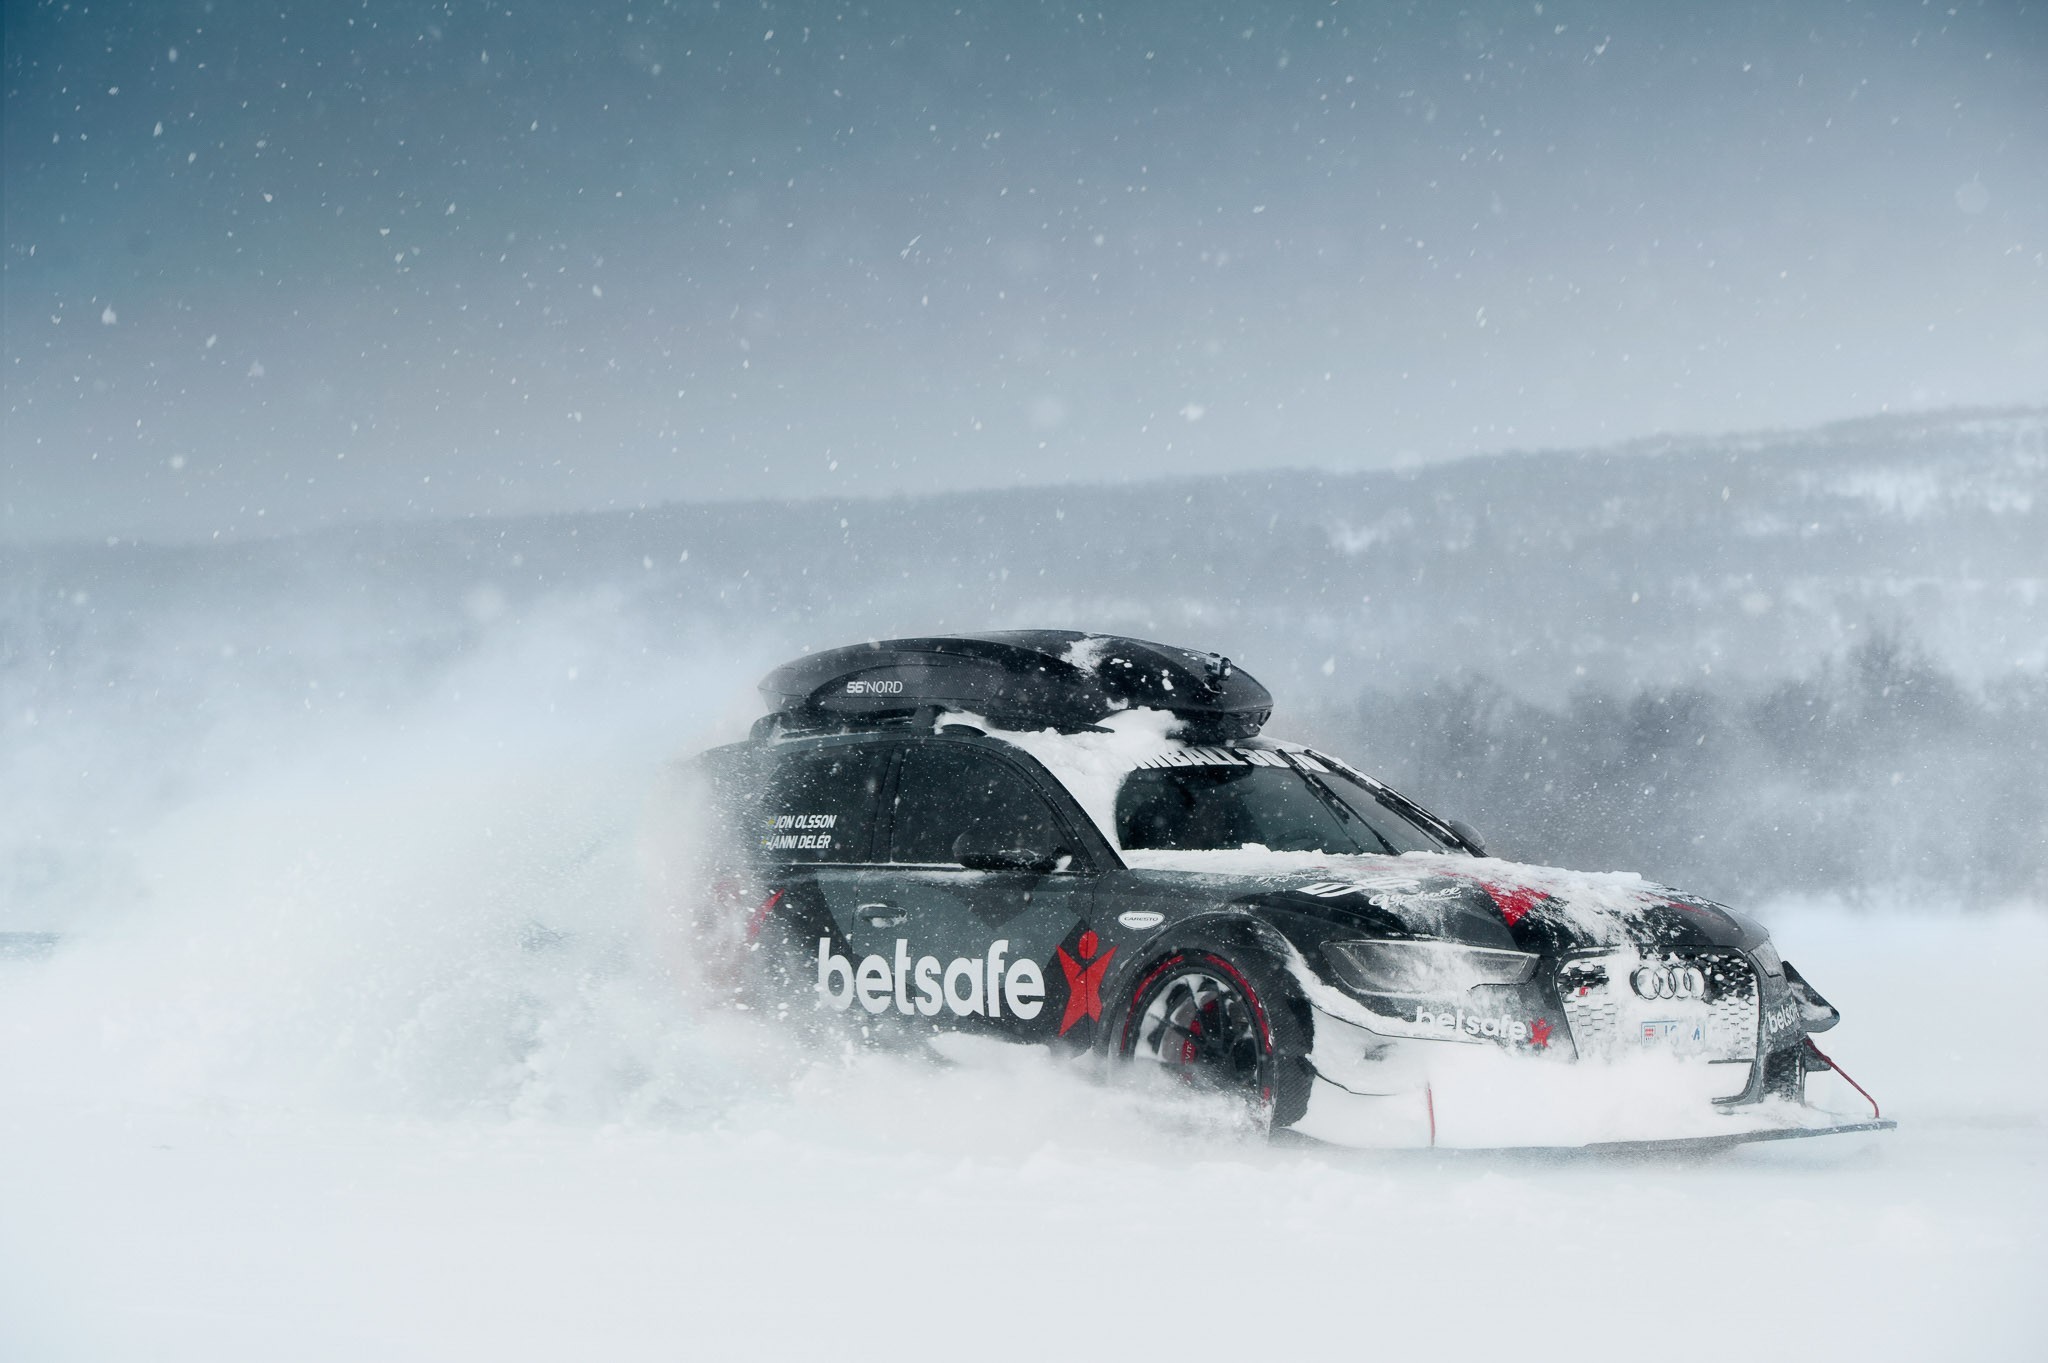 Audi Rs6 Audi Rs6 Audi Rs6 Avant Gumball Gumball 3000 - Jon Olsson Audi Rs6 Snow , HD Wallpaper & Backgrounds